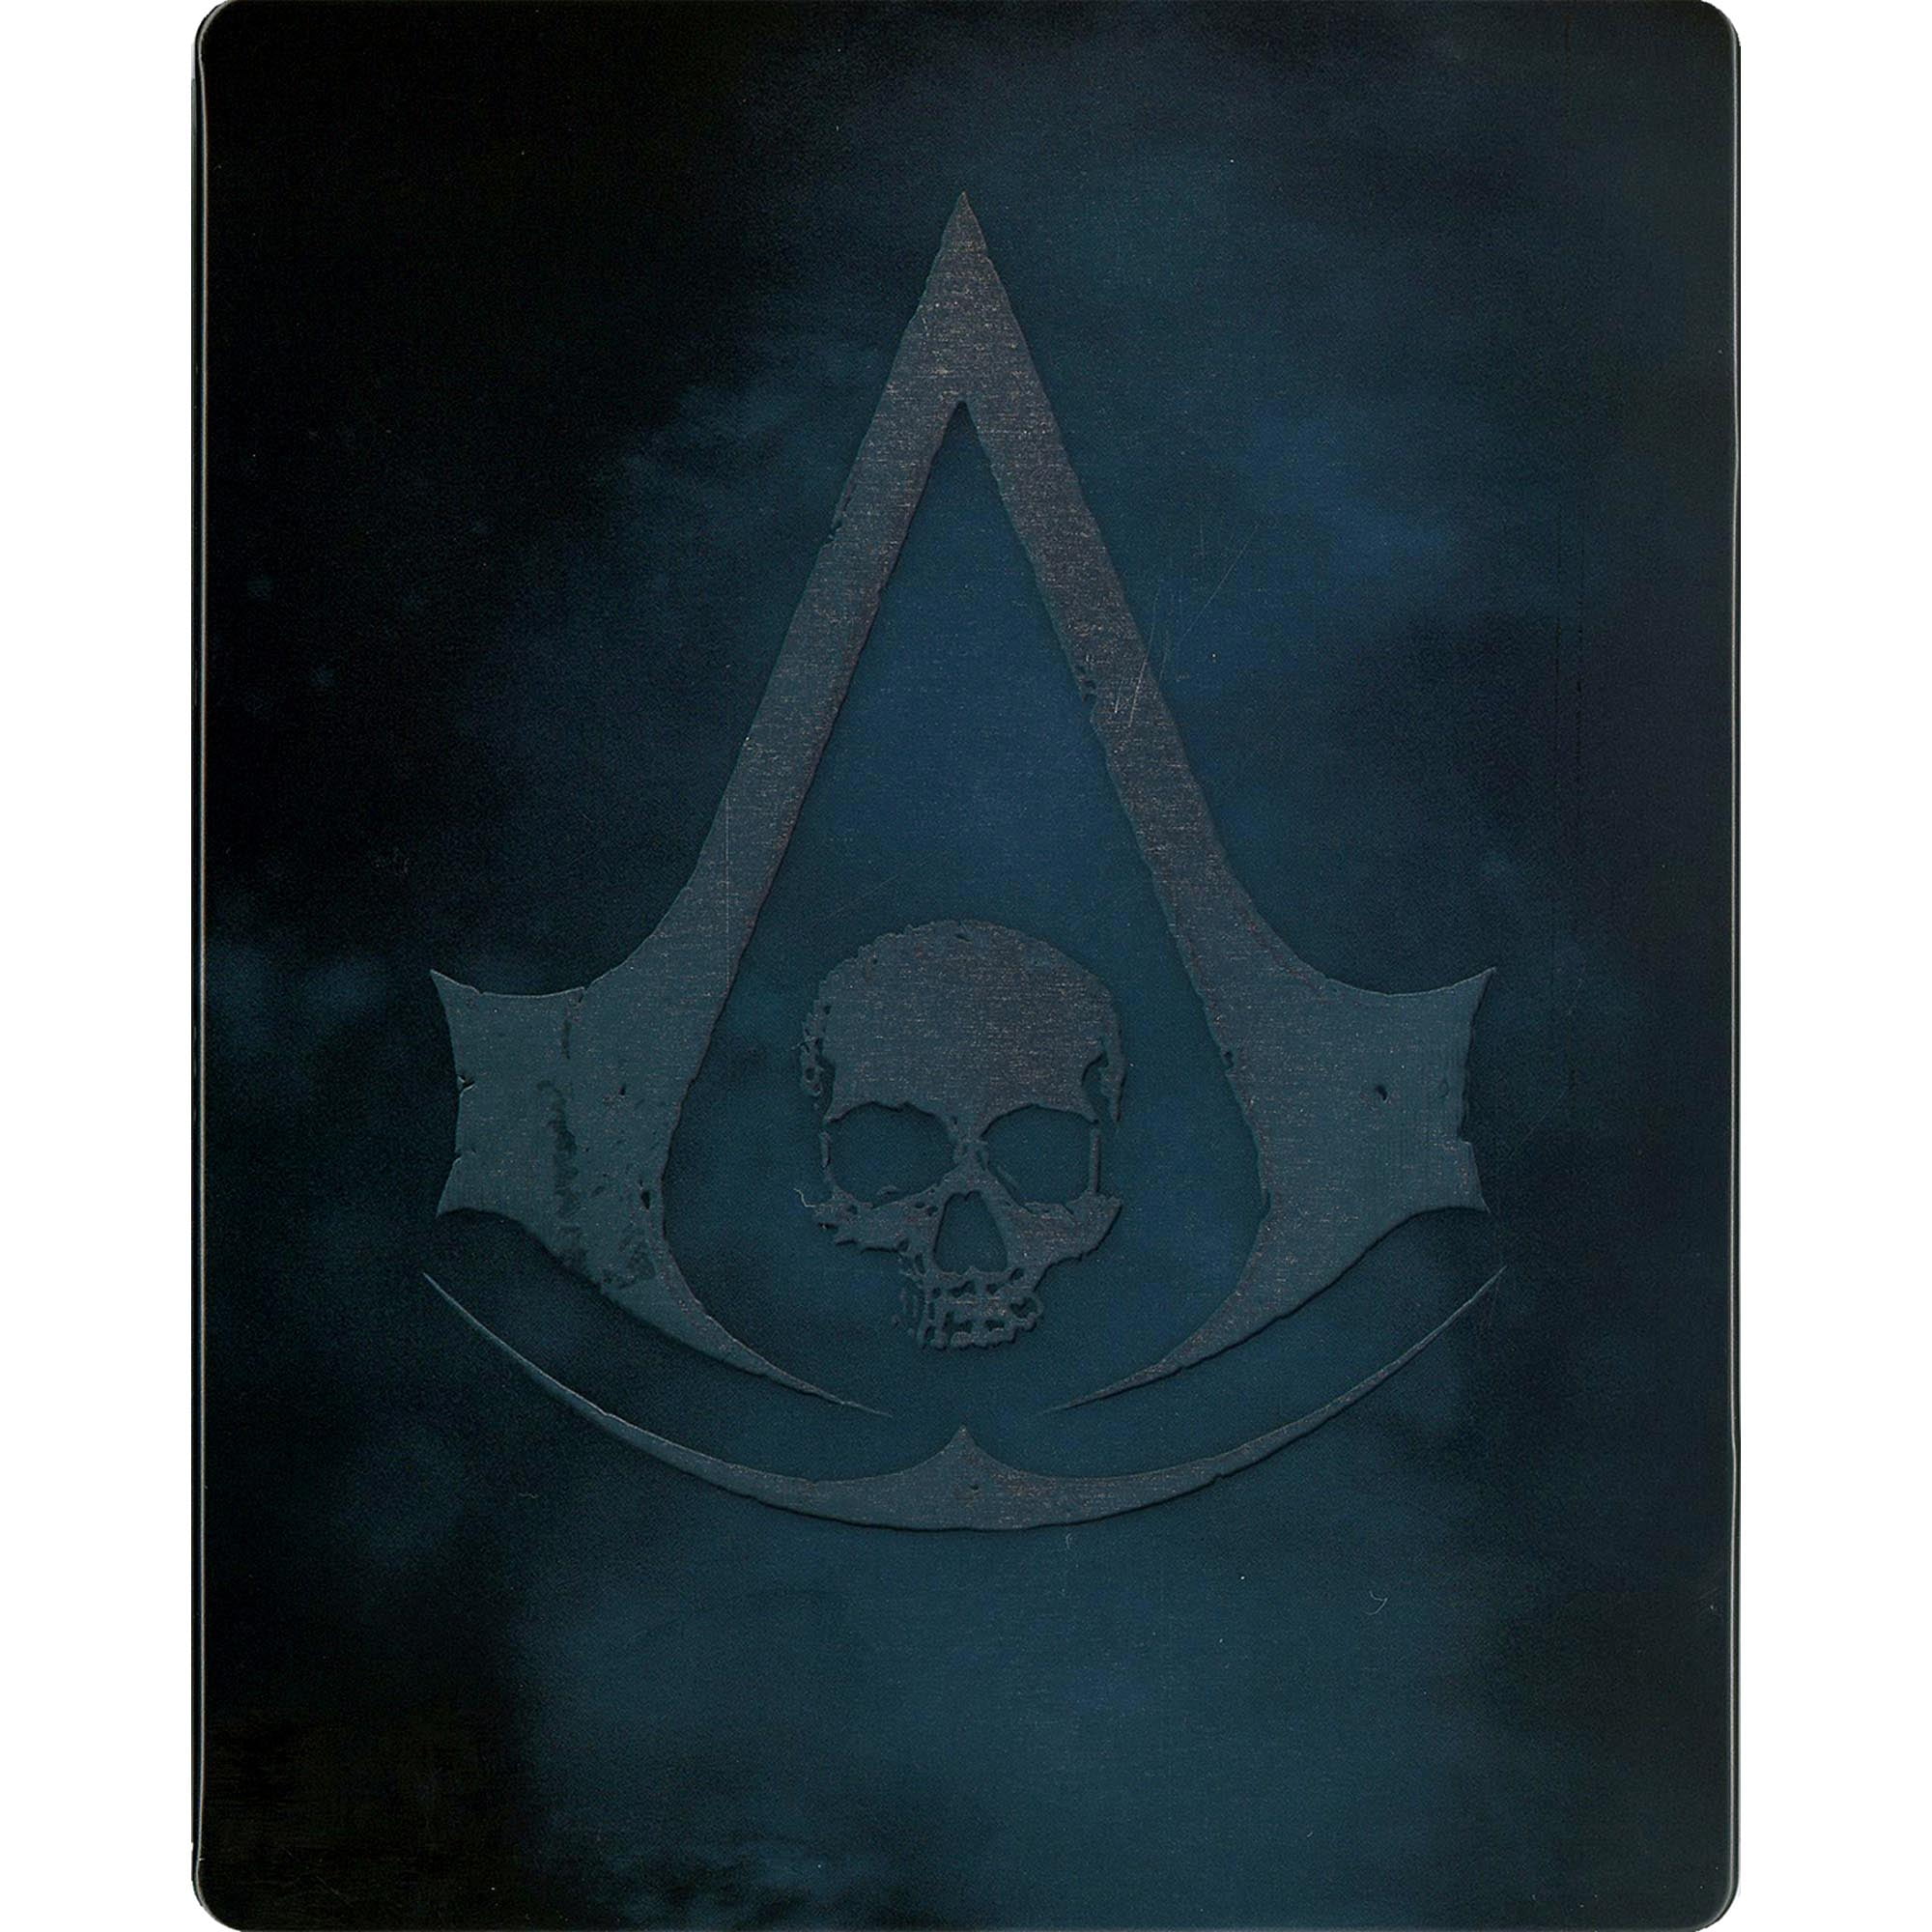 assassins creed 4 black flag limited edition